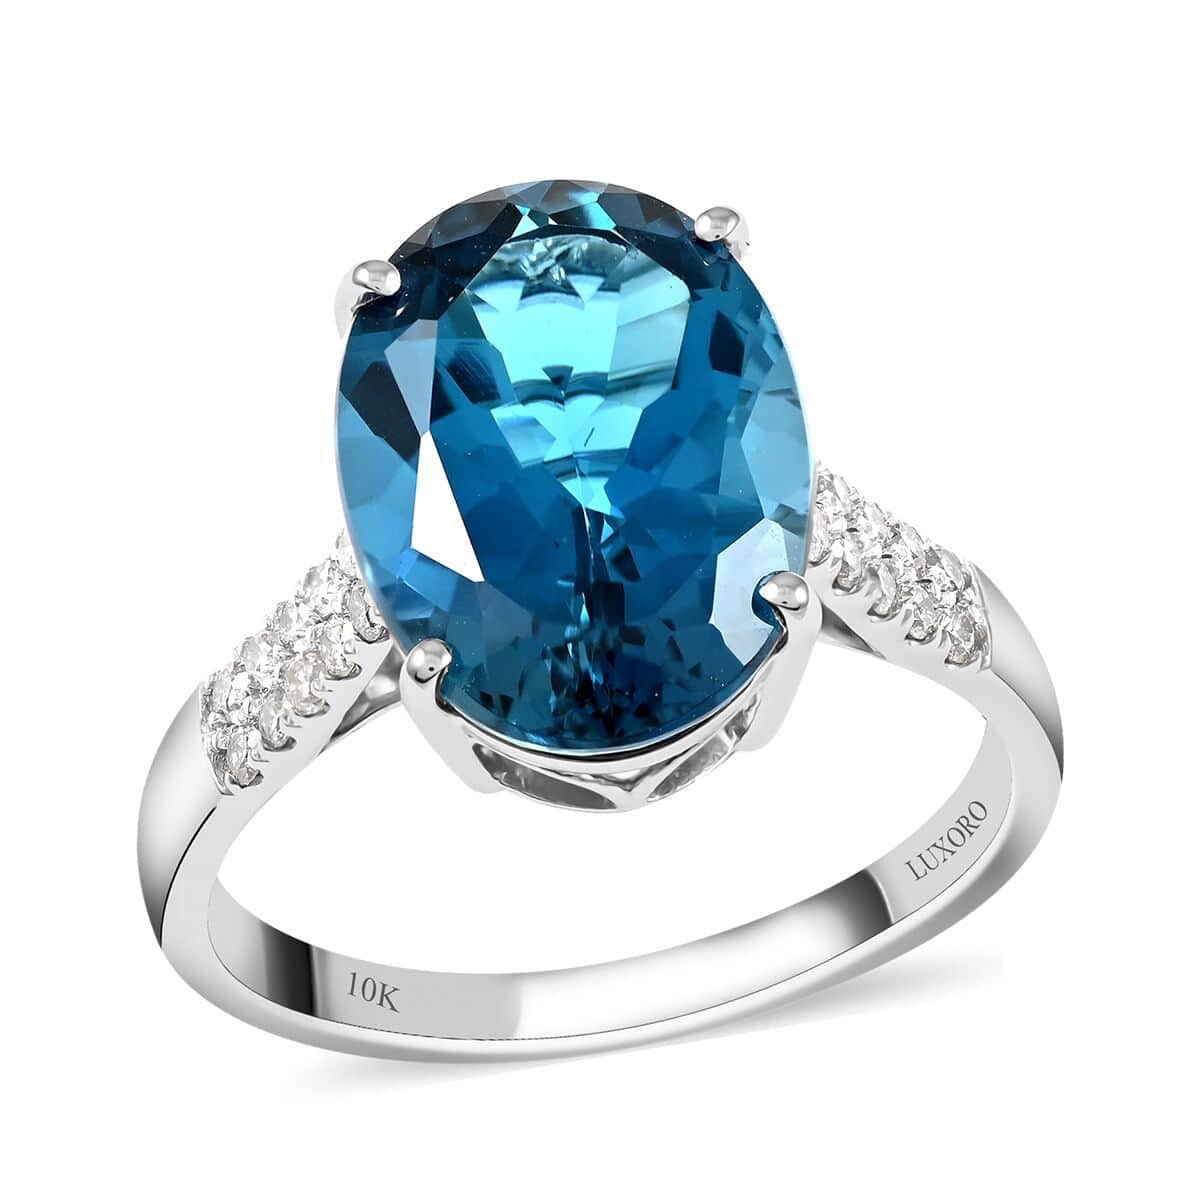 Luxoro AAA London Blue Topaz Ring, Certified & Appraised Blue Topaz Ring, Diamond Accent Ring, 10K White Gold, Wedding Rings 7.25 ctw (Size 6) image number 0